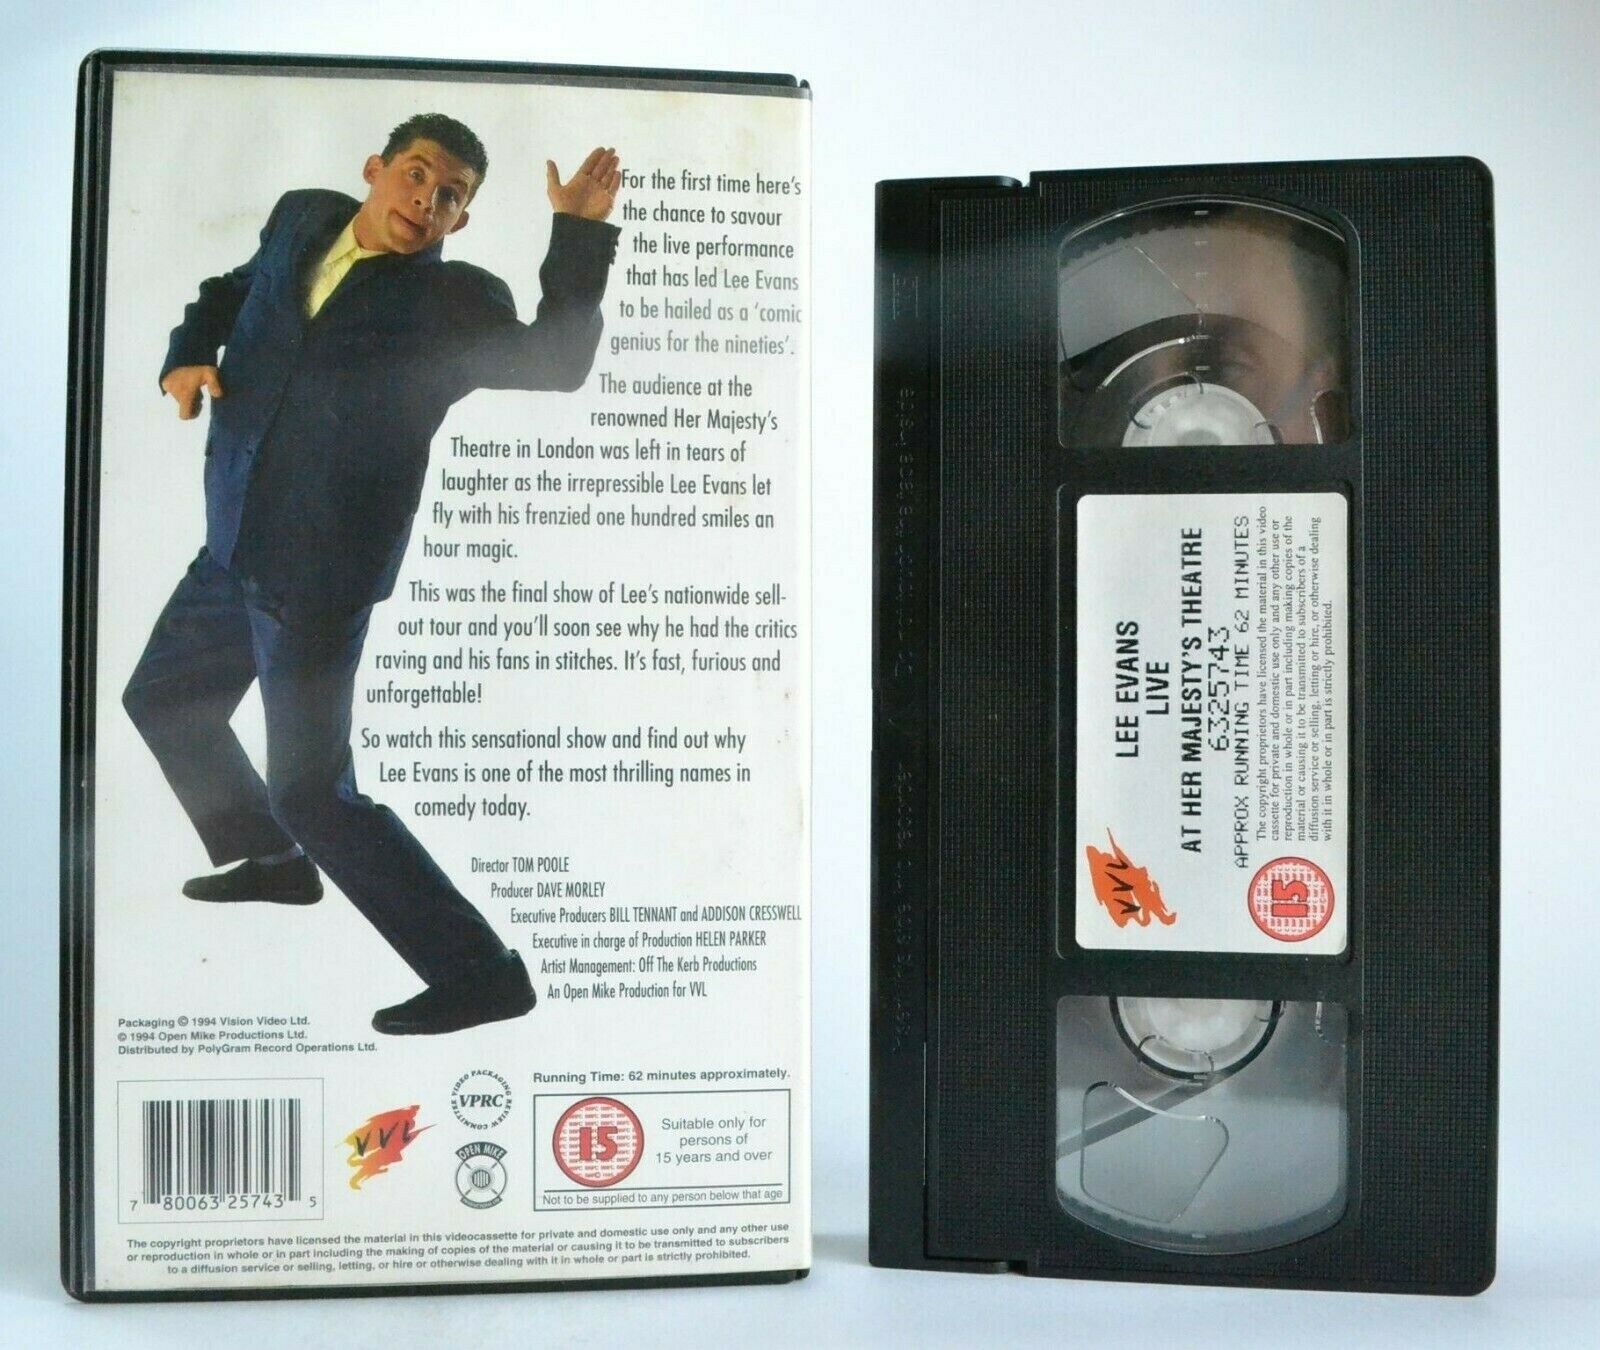 Lee Evans: Live At Her Majesty's Theatre - London - Comedy Performer - Pal VHS-